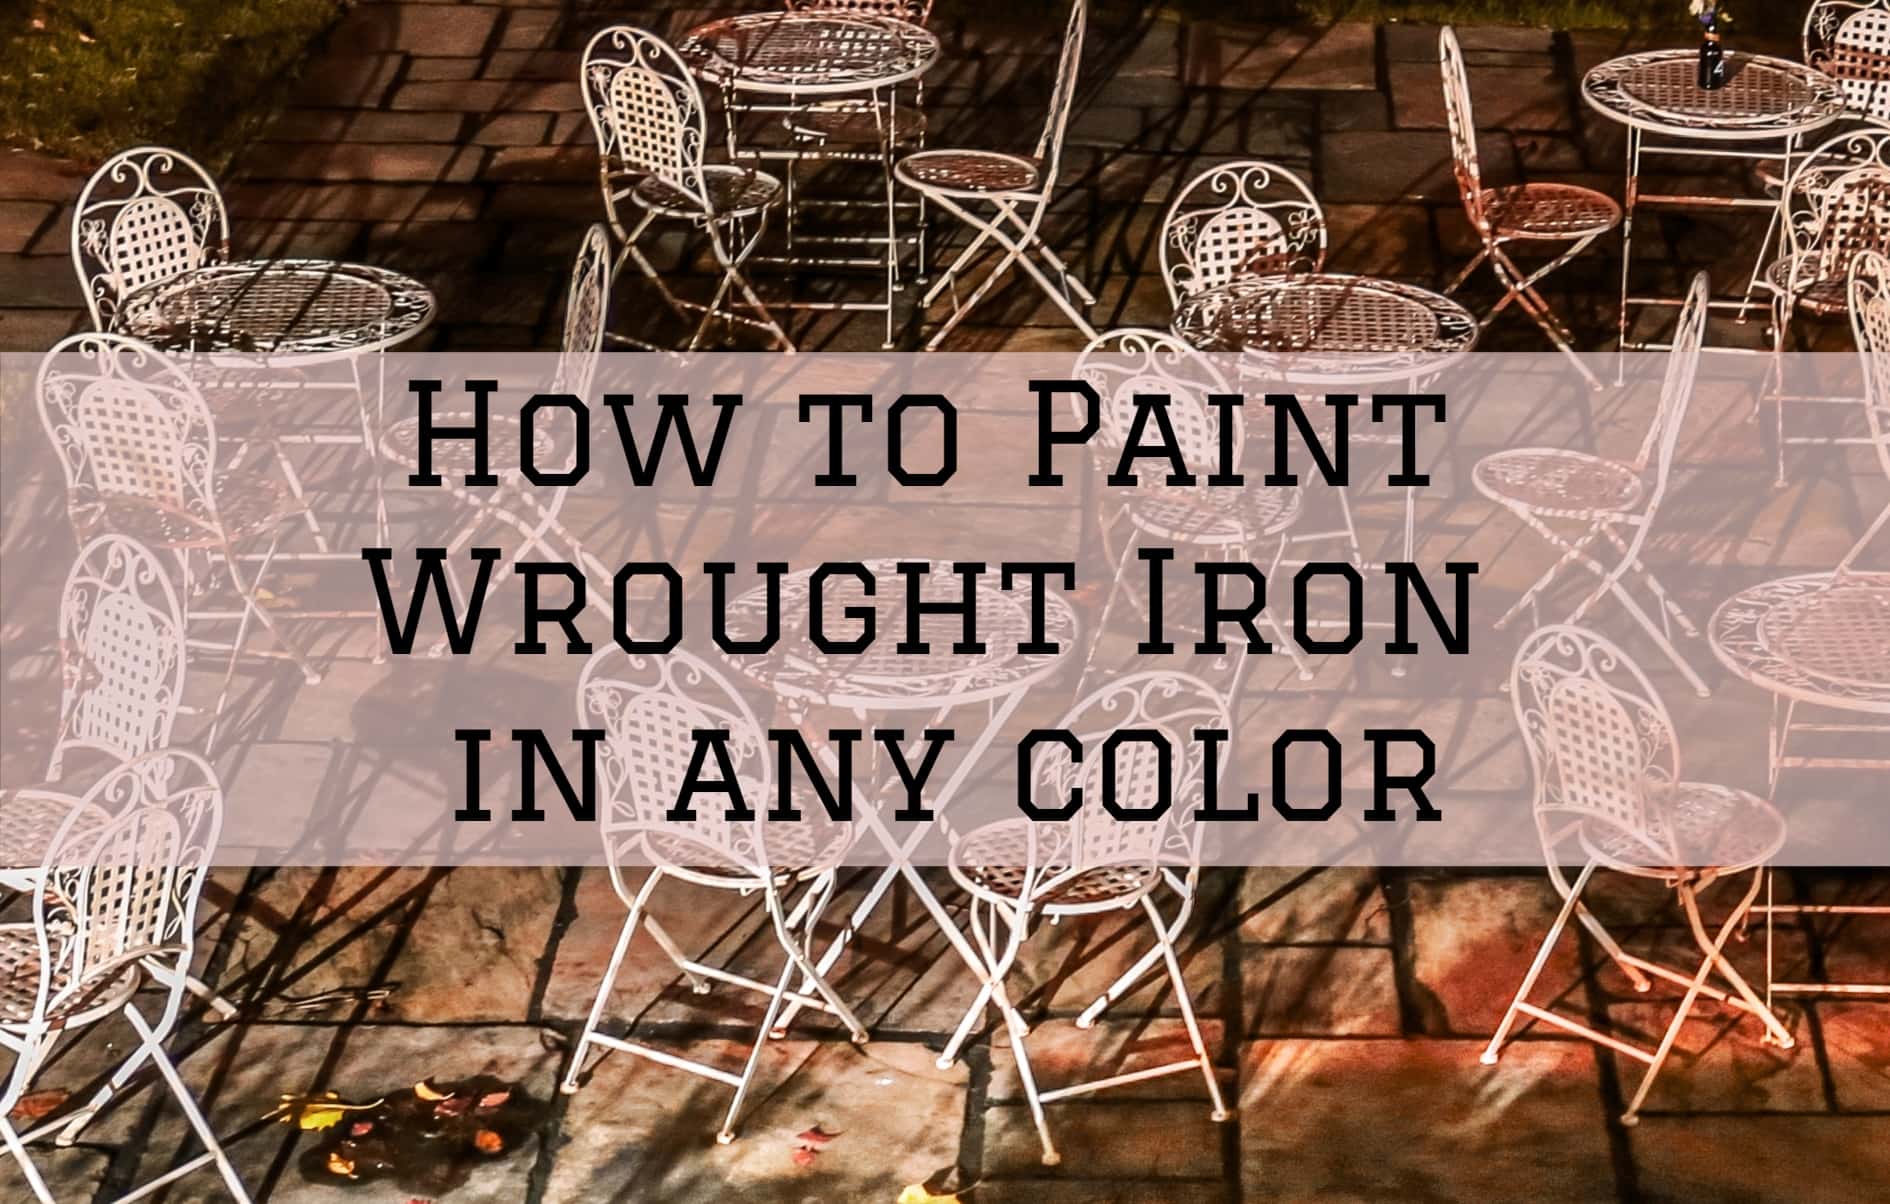 How to Paint Wrought Iron in any color - Peek Brothers ...